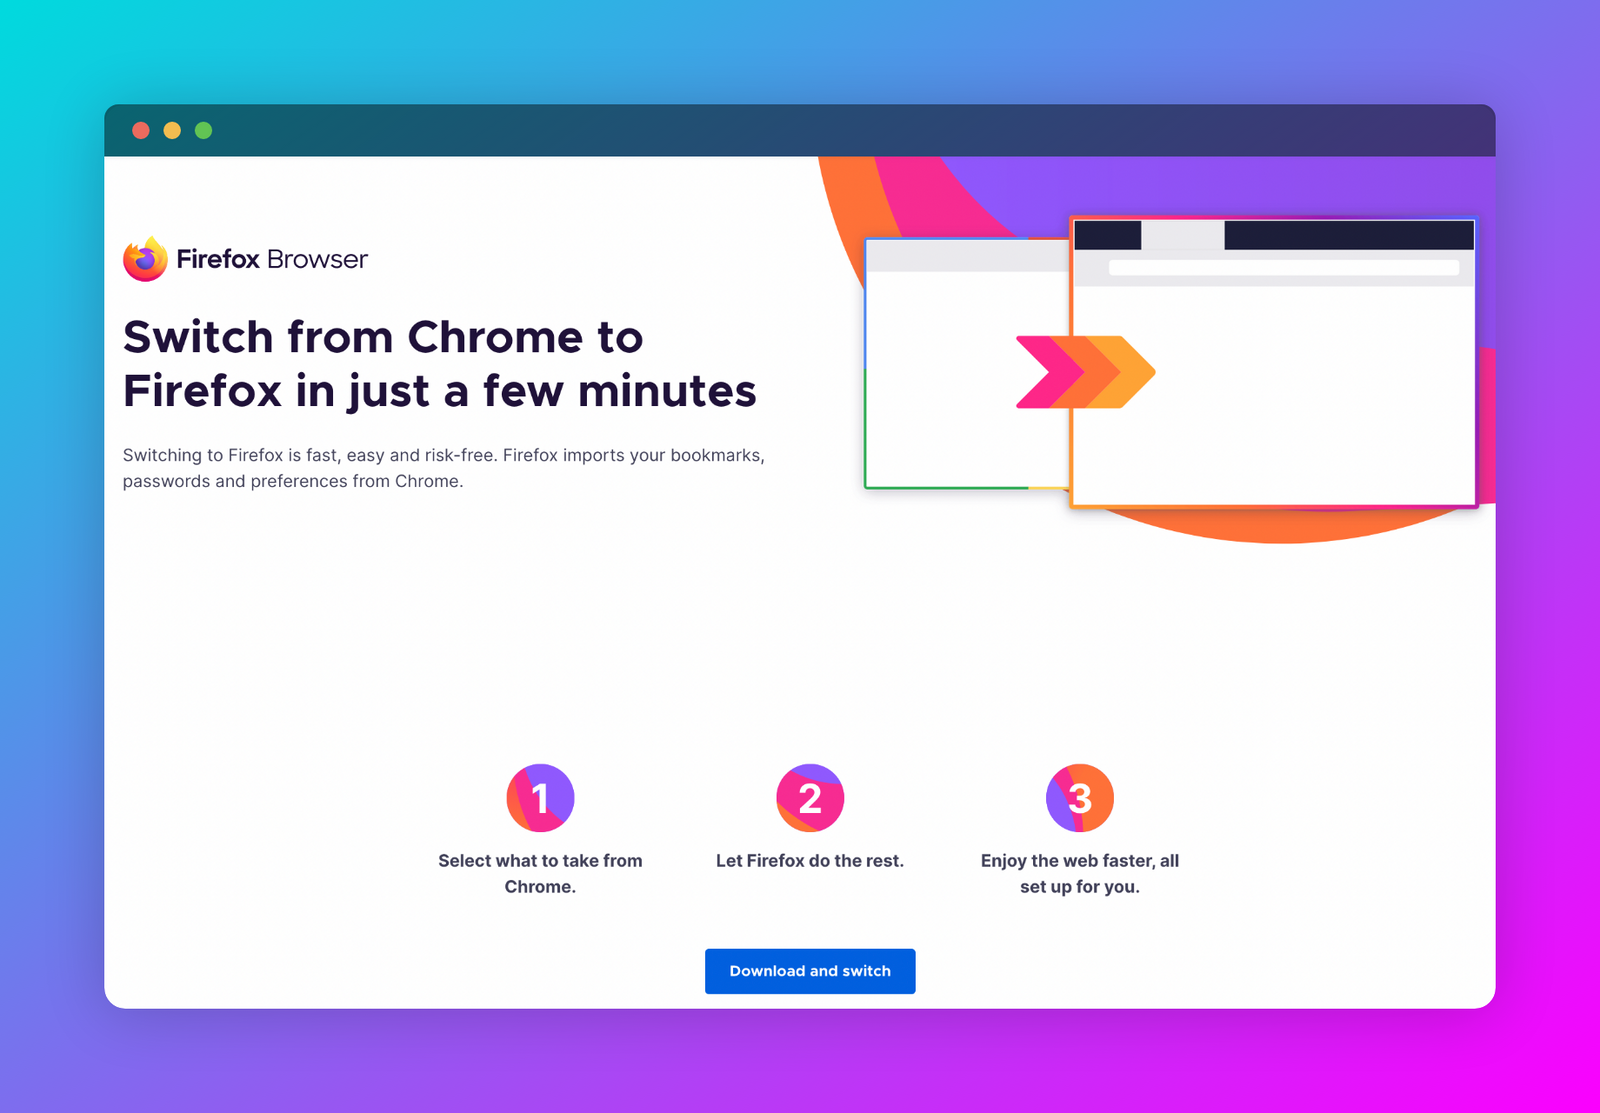 Firefox's landing page for switching from Chrome to Firefox